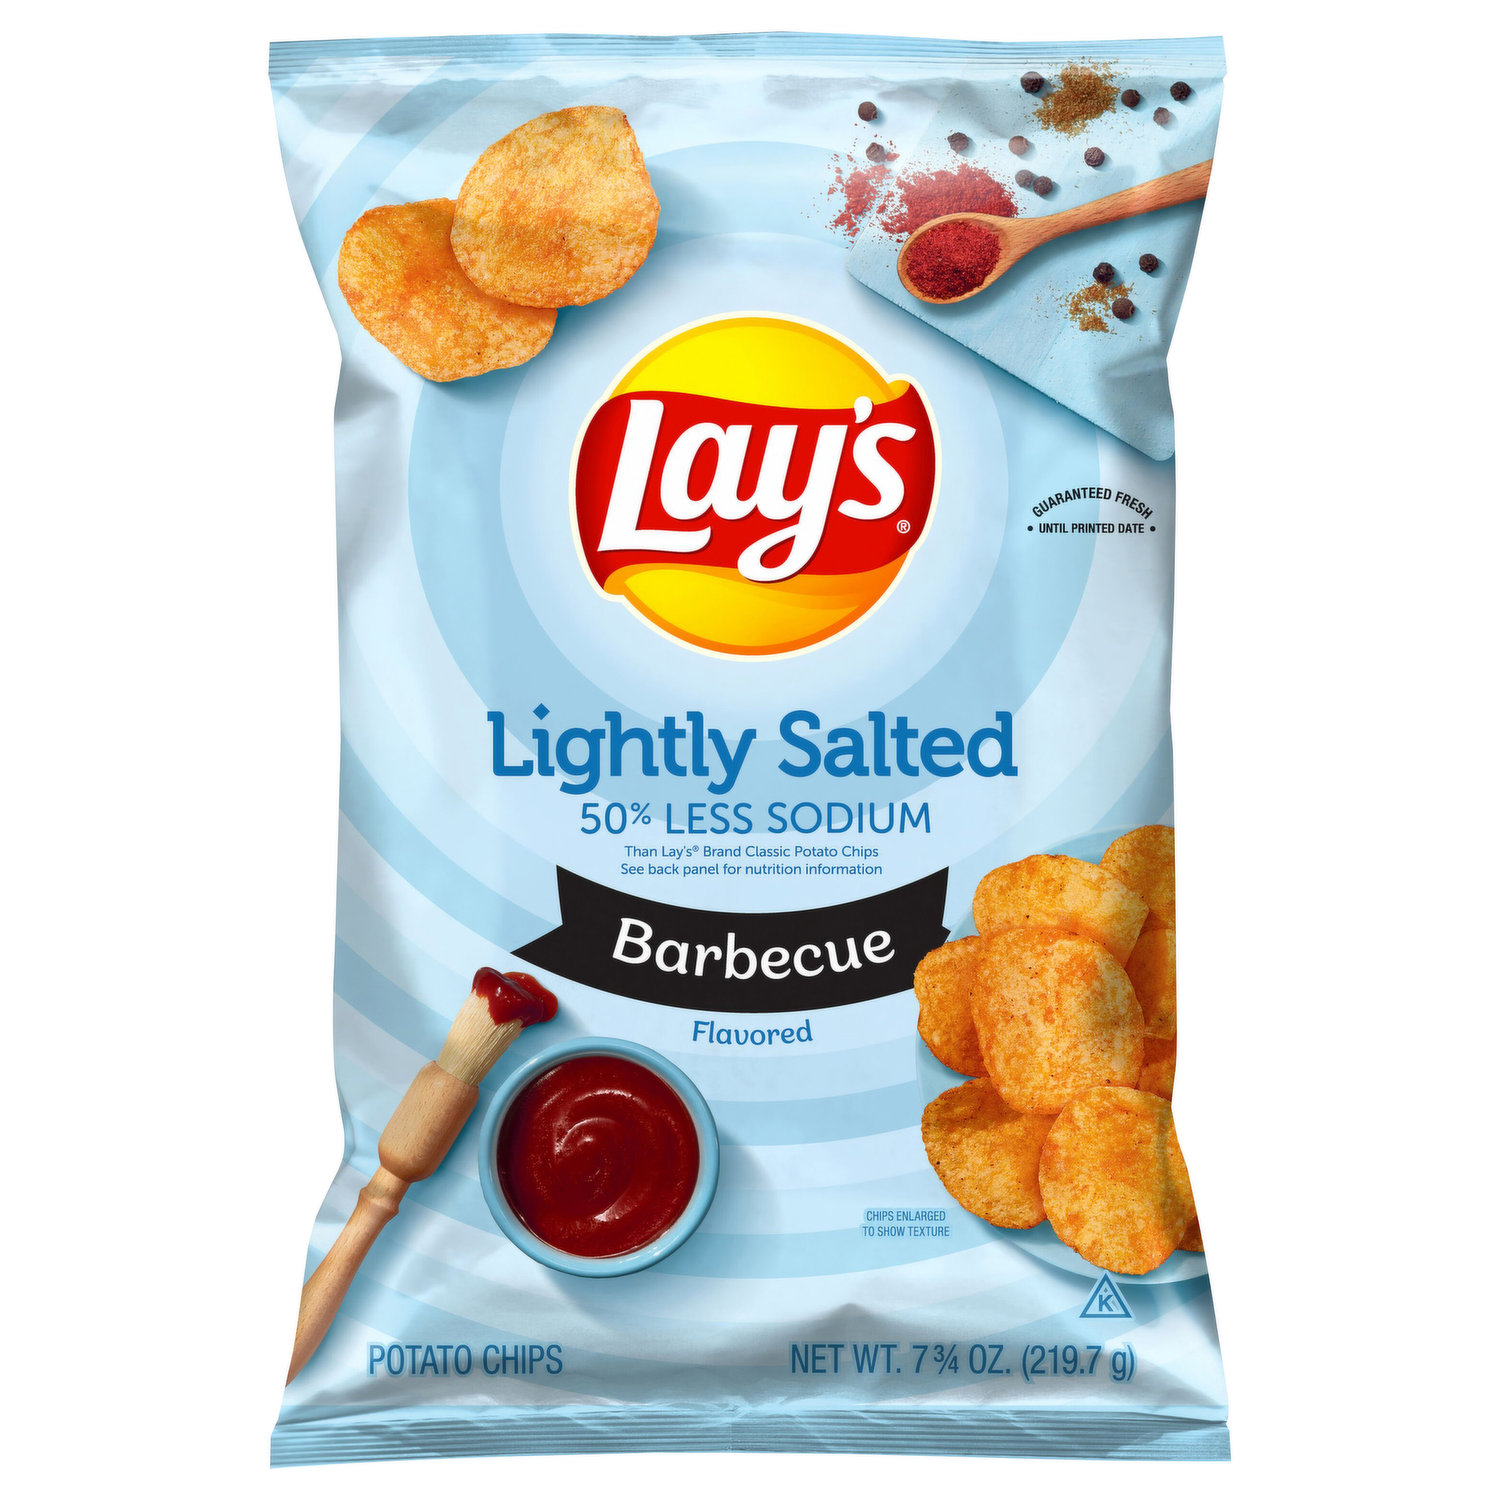 Late July Snacks, Thin and Crispy Organic Tortilla Chips, Sea Salt, 14.75  oz. Party Size Bag